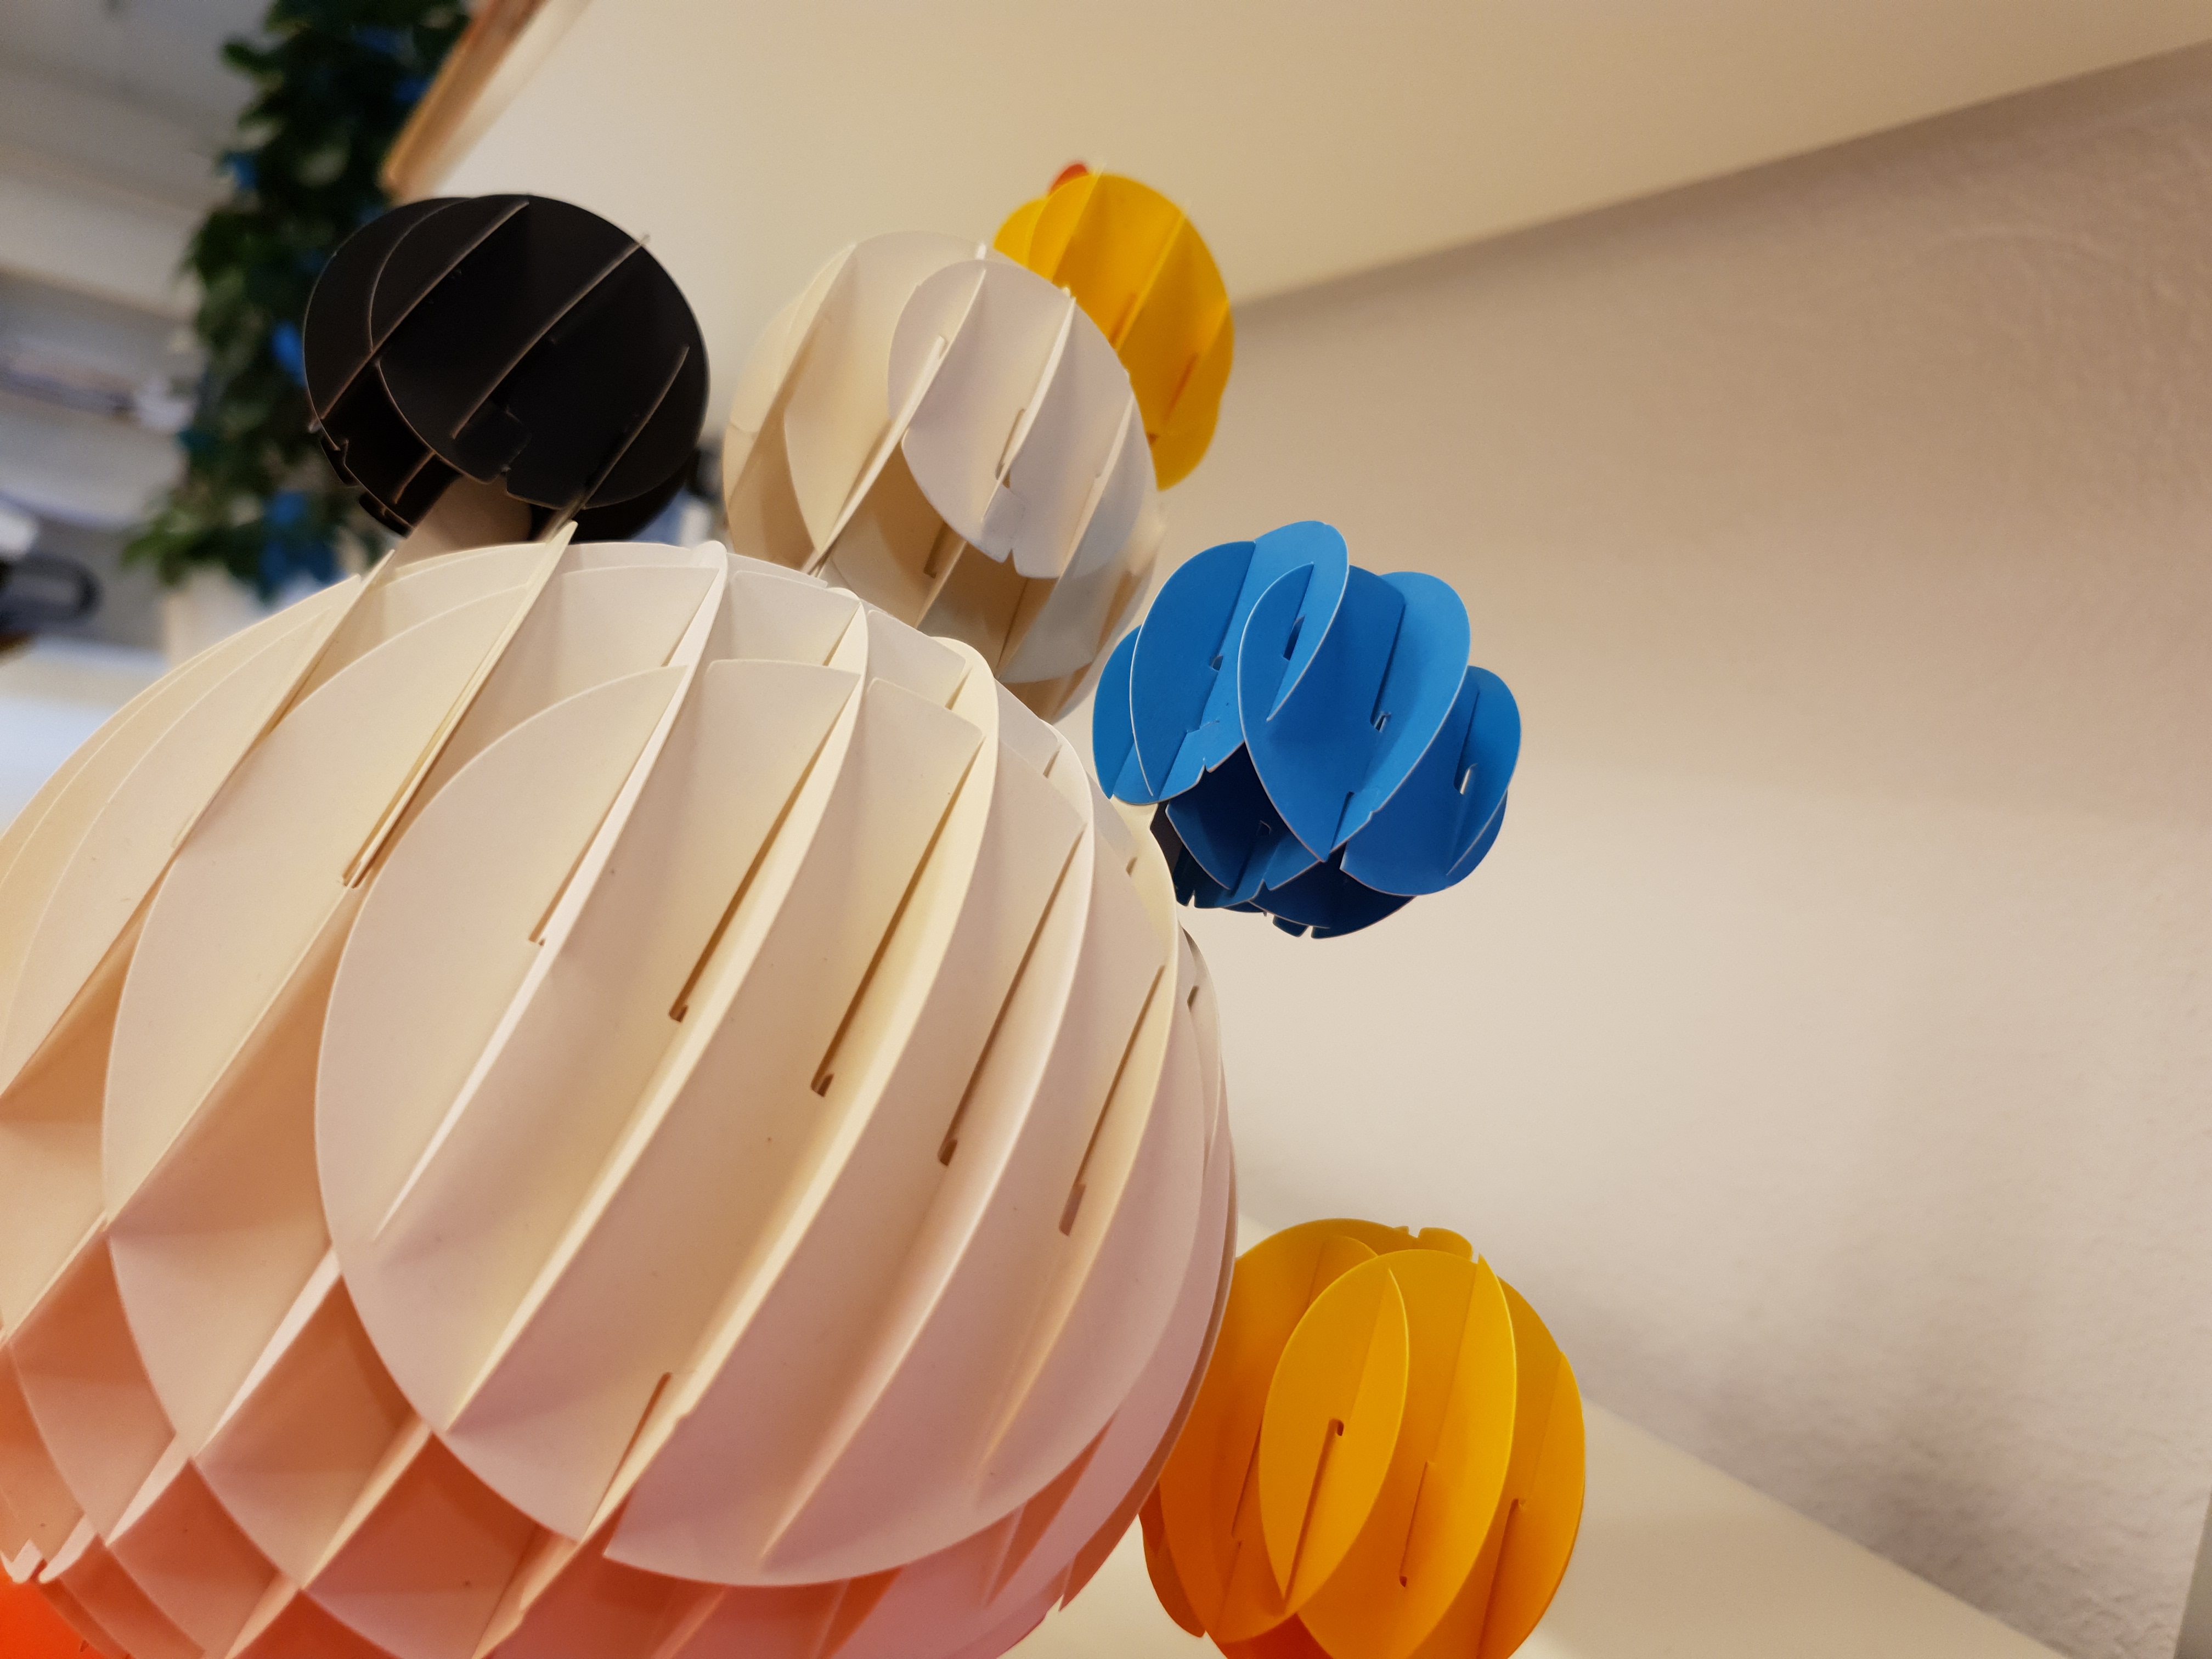 Paper balls in different colors. Photo.